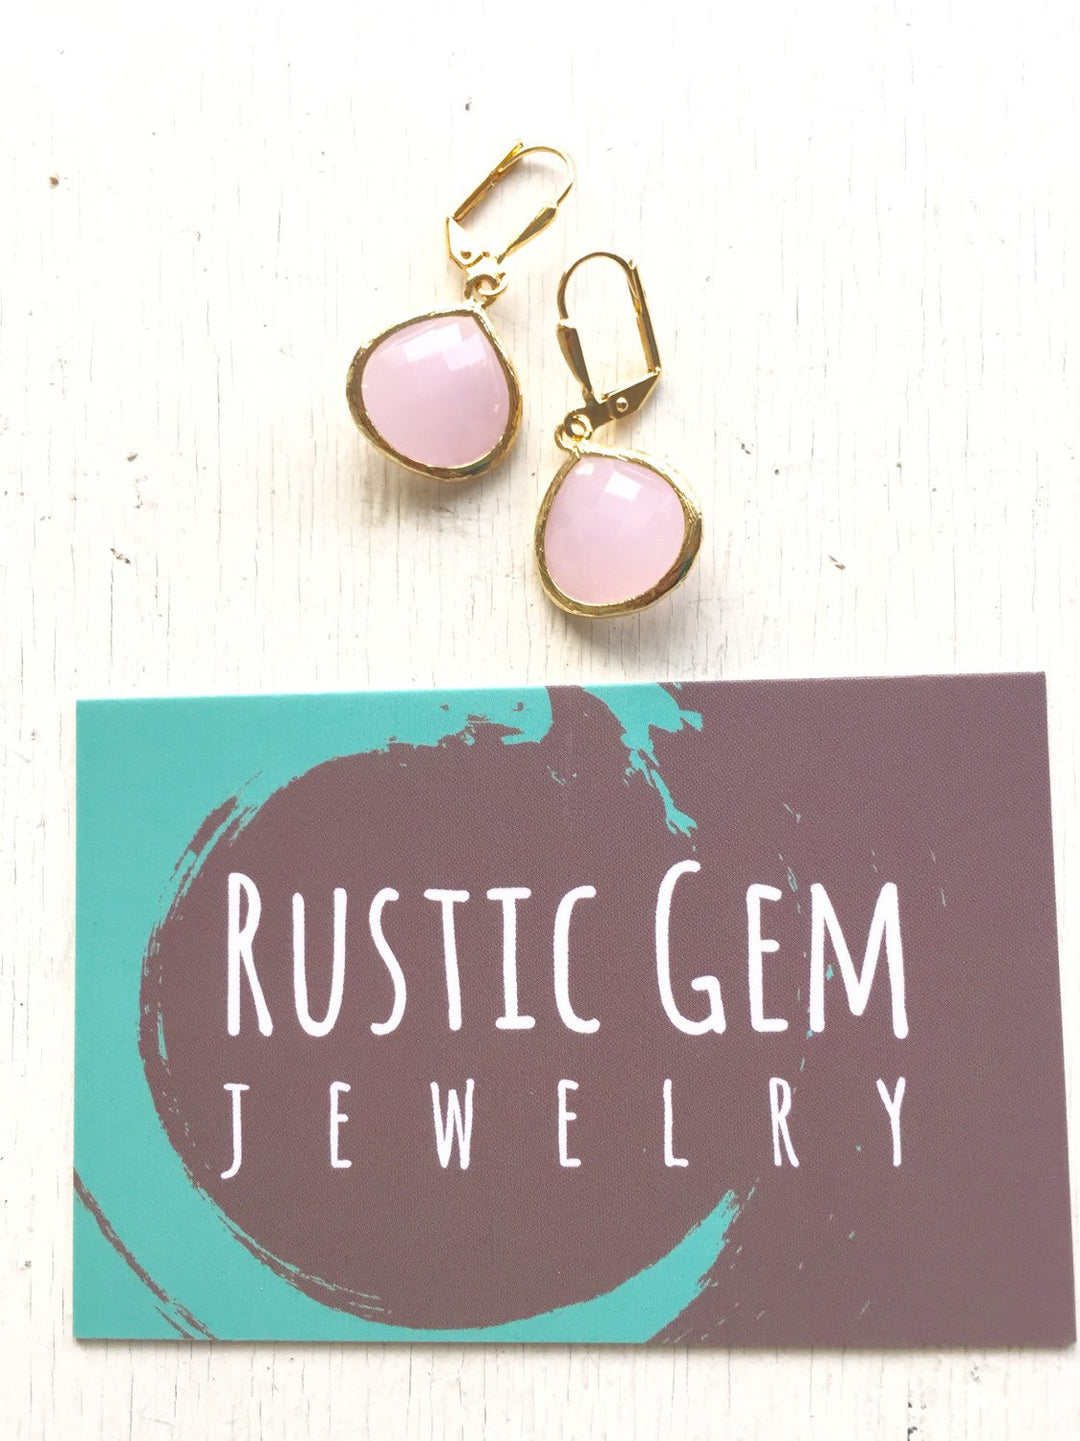 Simplicity Drop Earrings - Soft Pink Faceted Glass Teardrop in Gold. Simple Gold Earrings. Pink Fashion Earrings. Gift for Her.